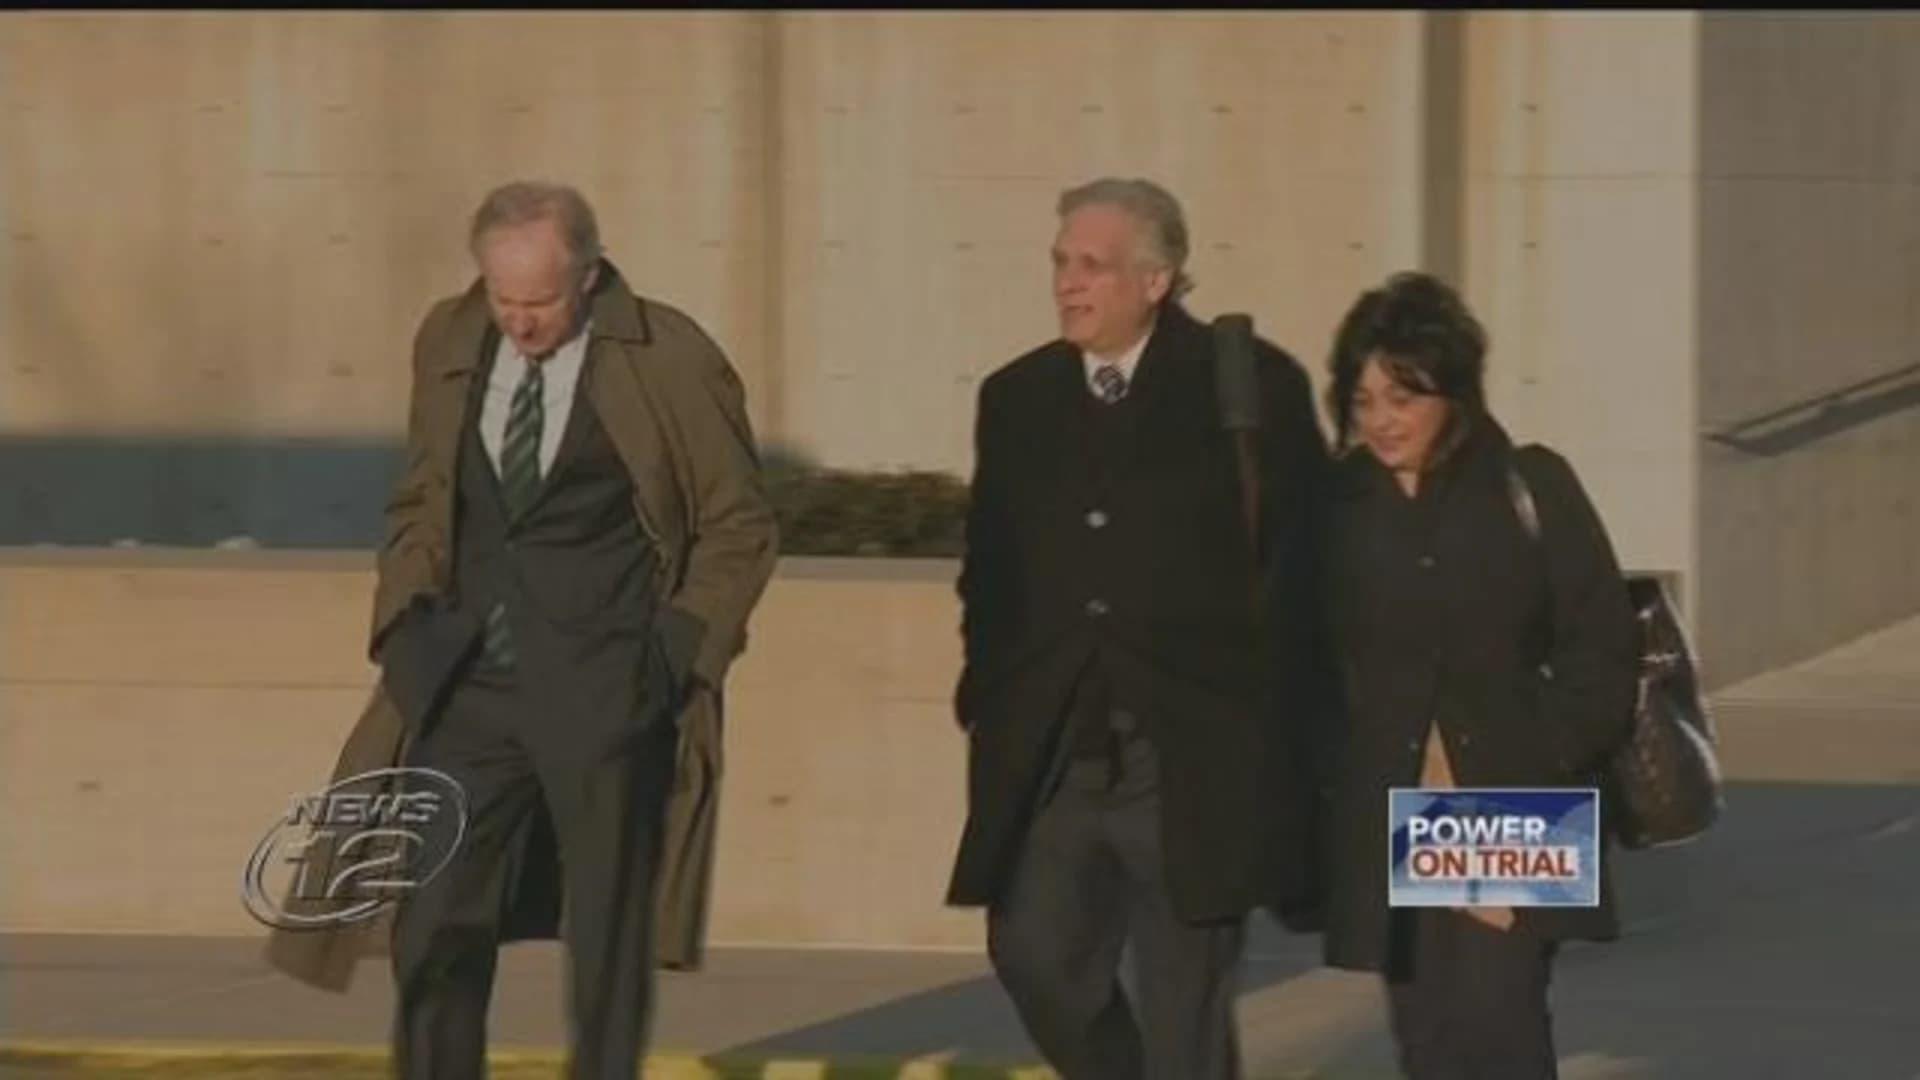 Jurors deliberate for 3rd day without verdict in Mangano retrial